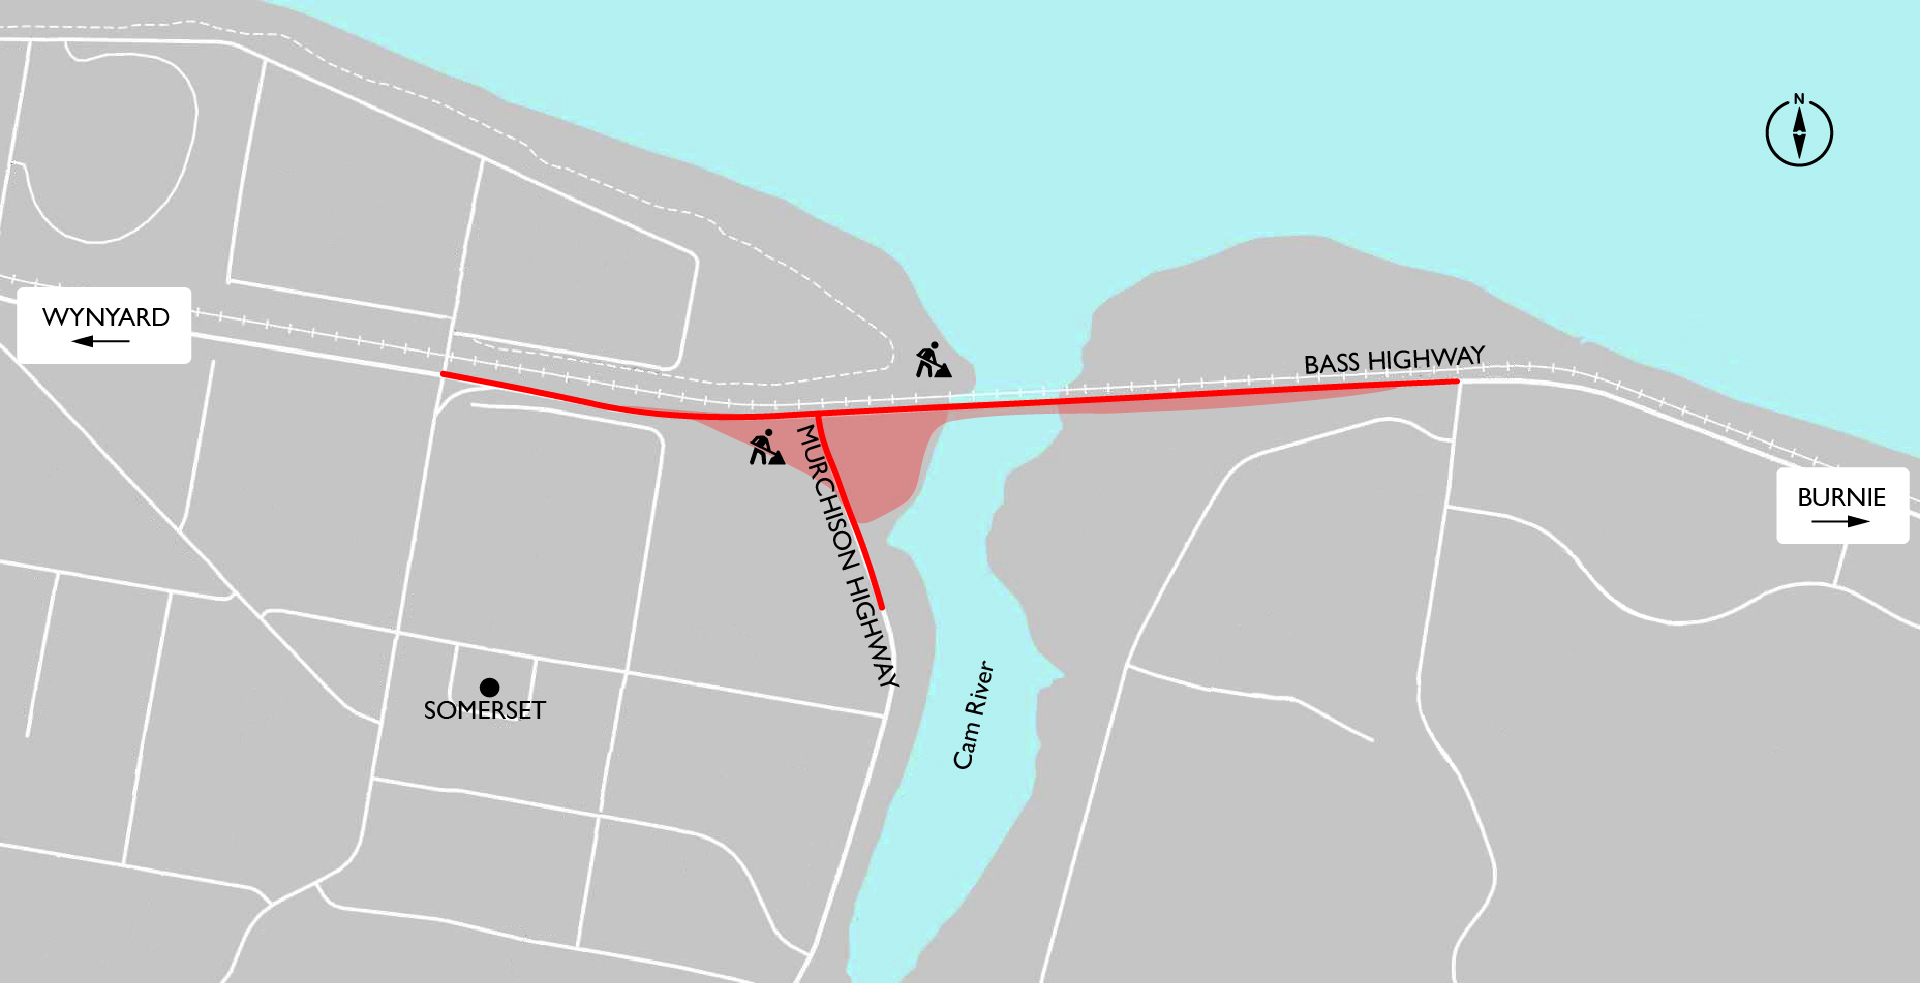 A map showing the location of the works for the Cam River Bridge replacement and Murchison Highway signalisation project. The total project area includes the Bass Highway, between Falmouth Street and East Cam Road, and a short section of the Murchison Highway, between Bass Highway and Simpson Street